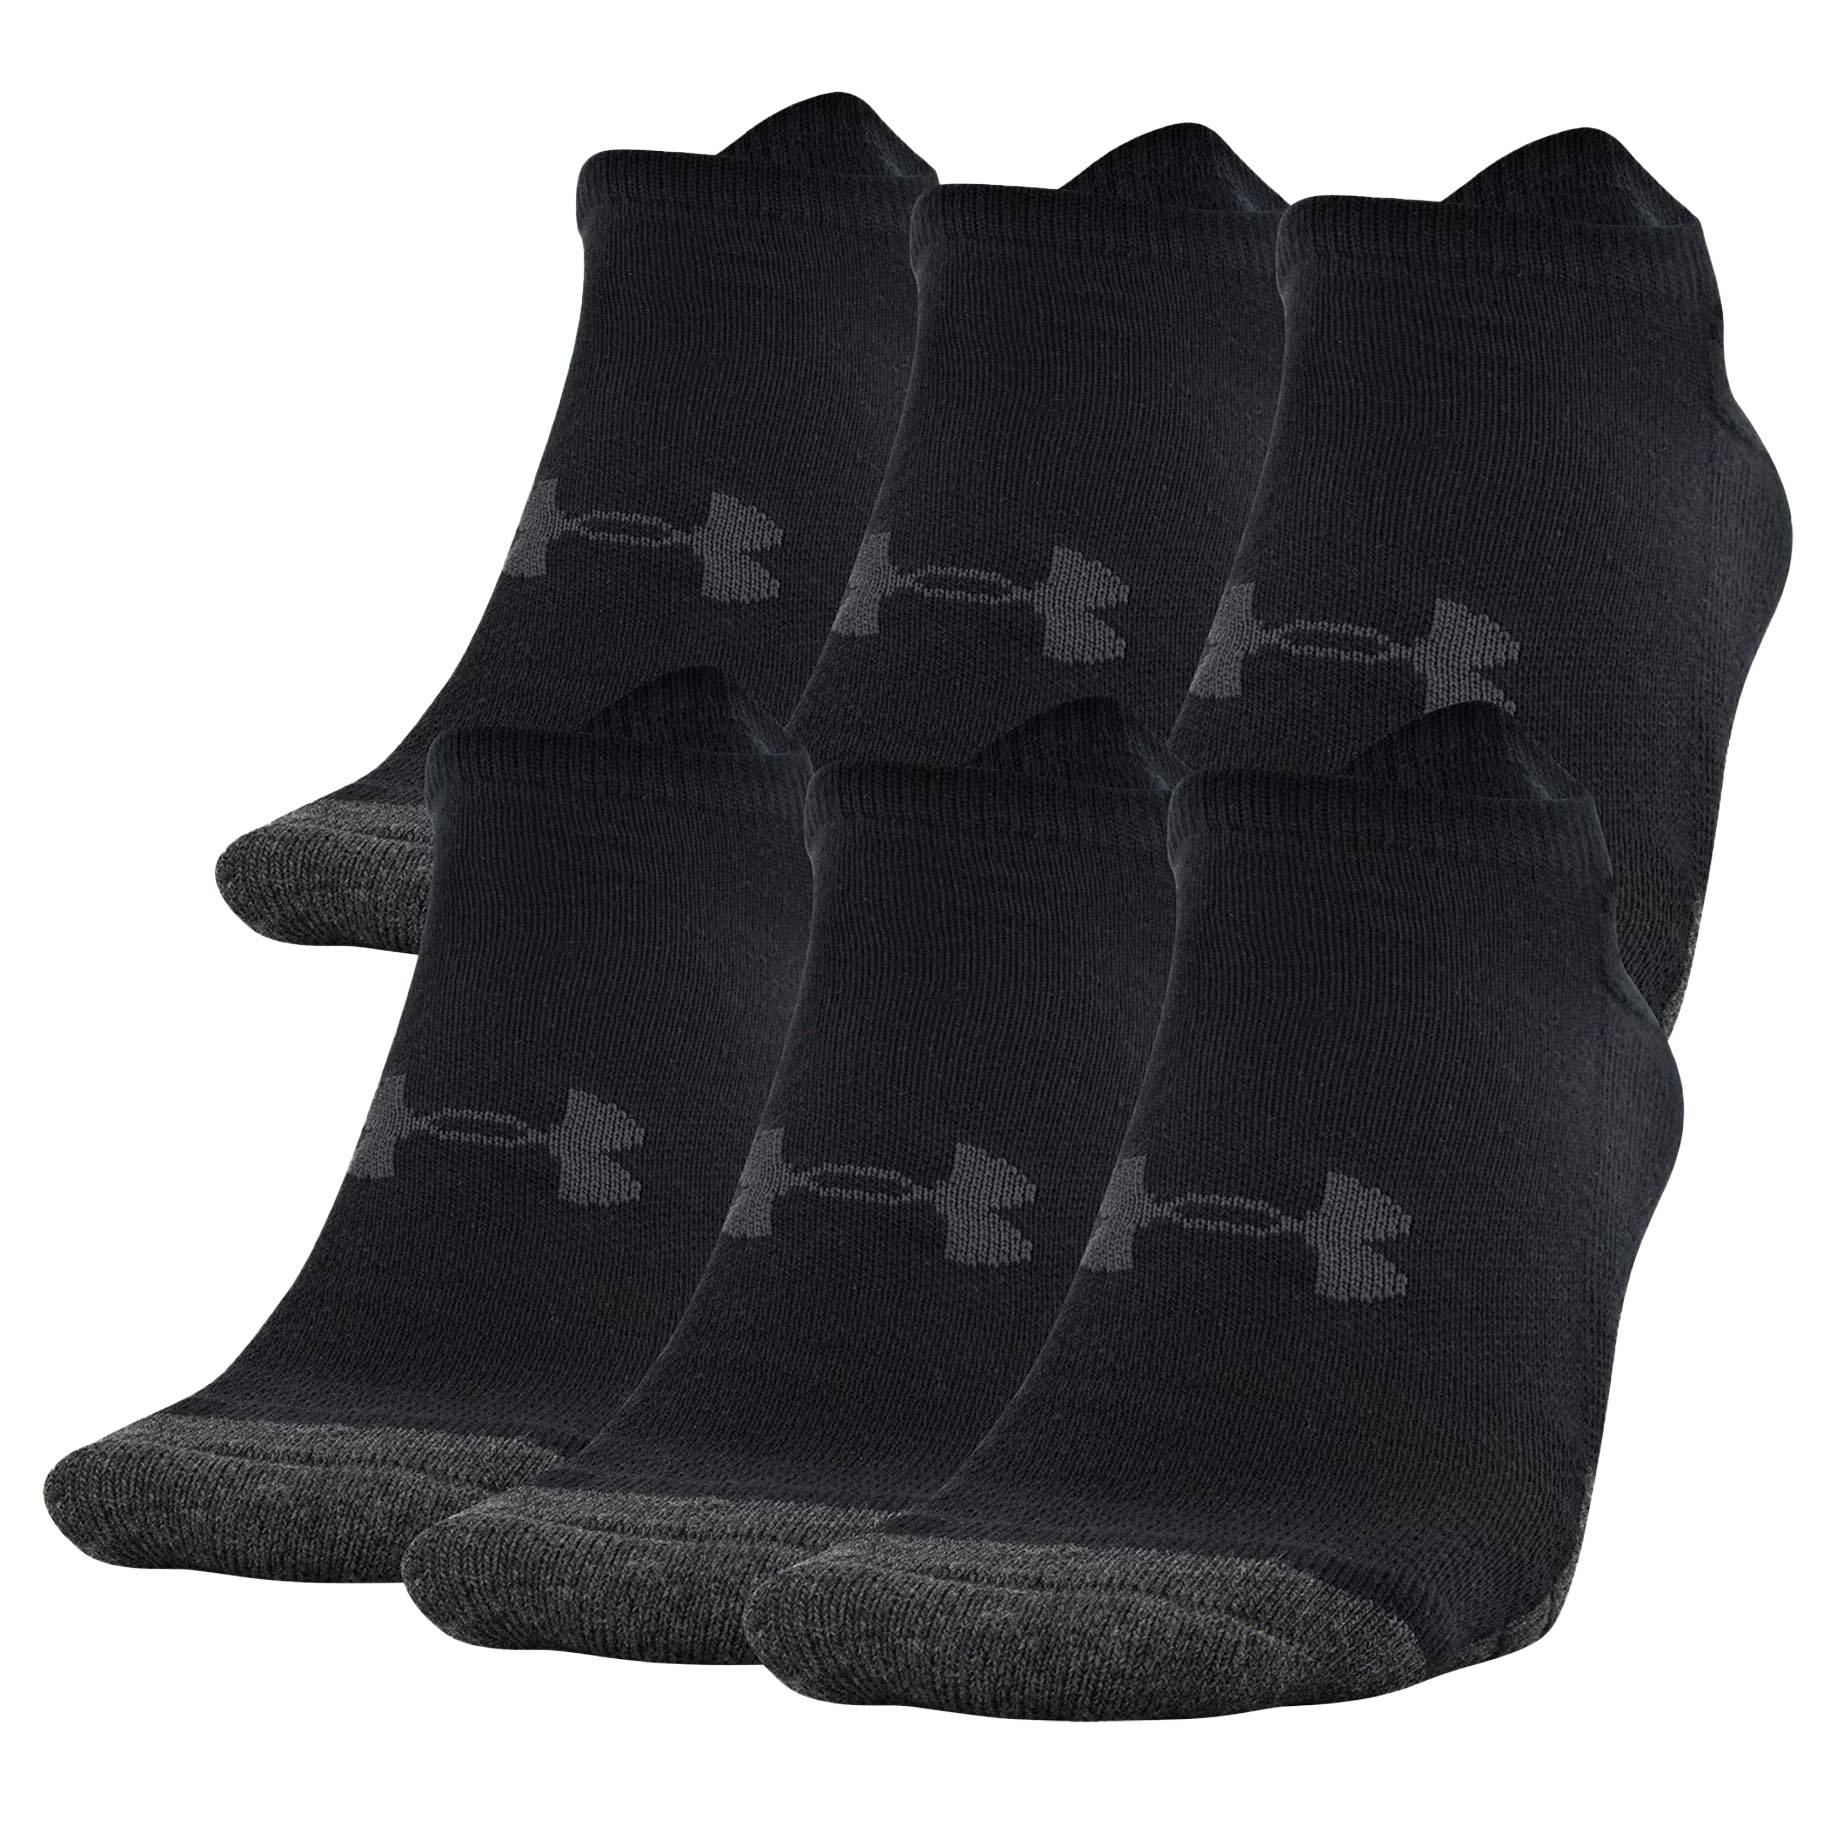 UNDER ARMOUR PERFORMANCE TECH NO SHOW SOCKS (6 PACK)